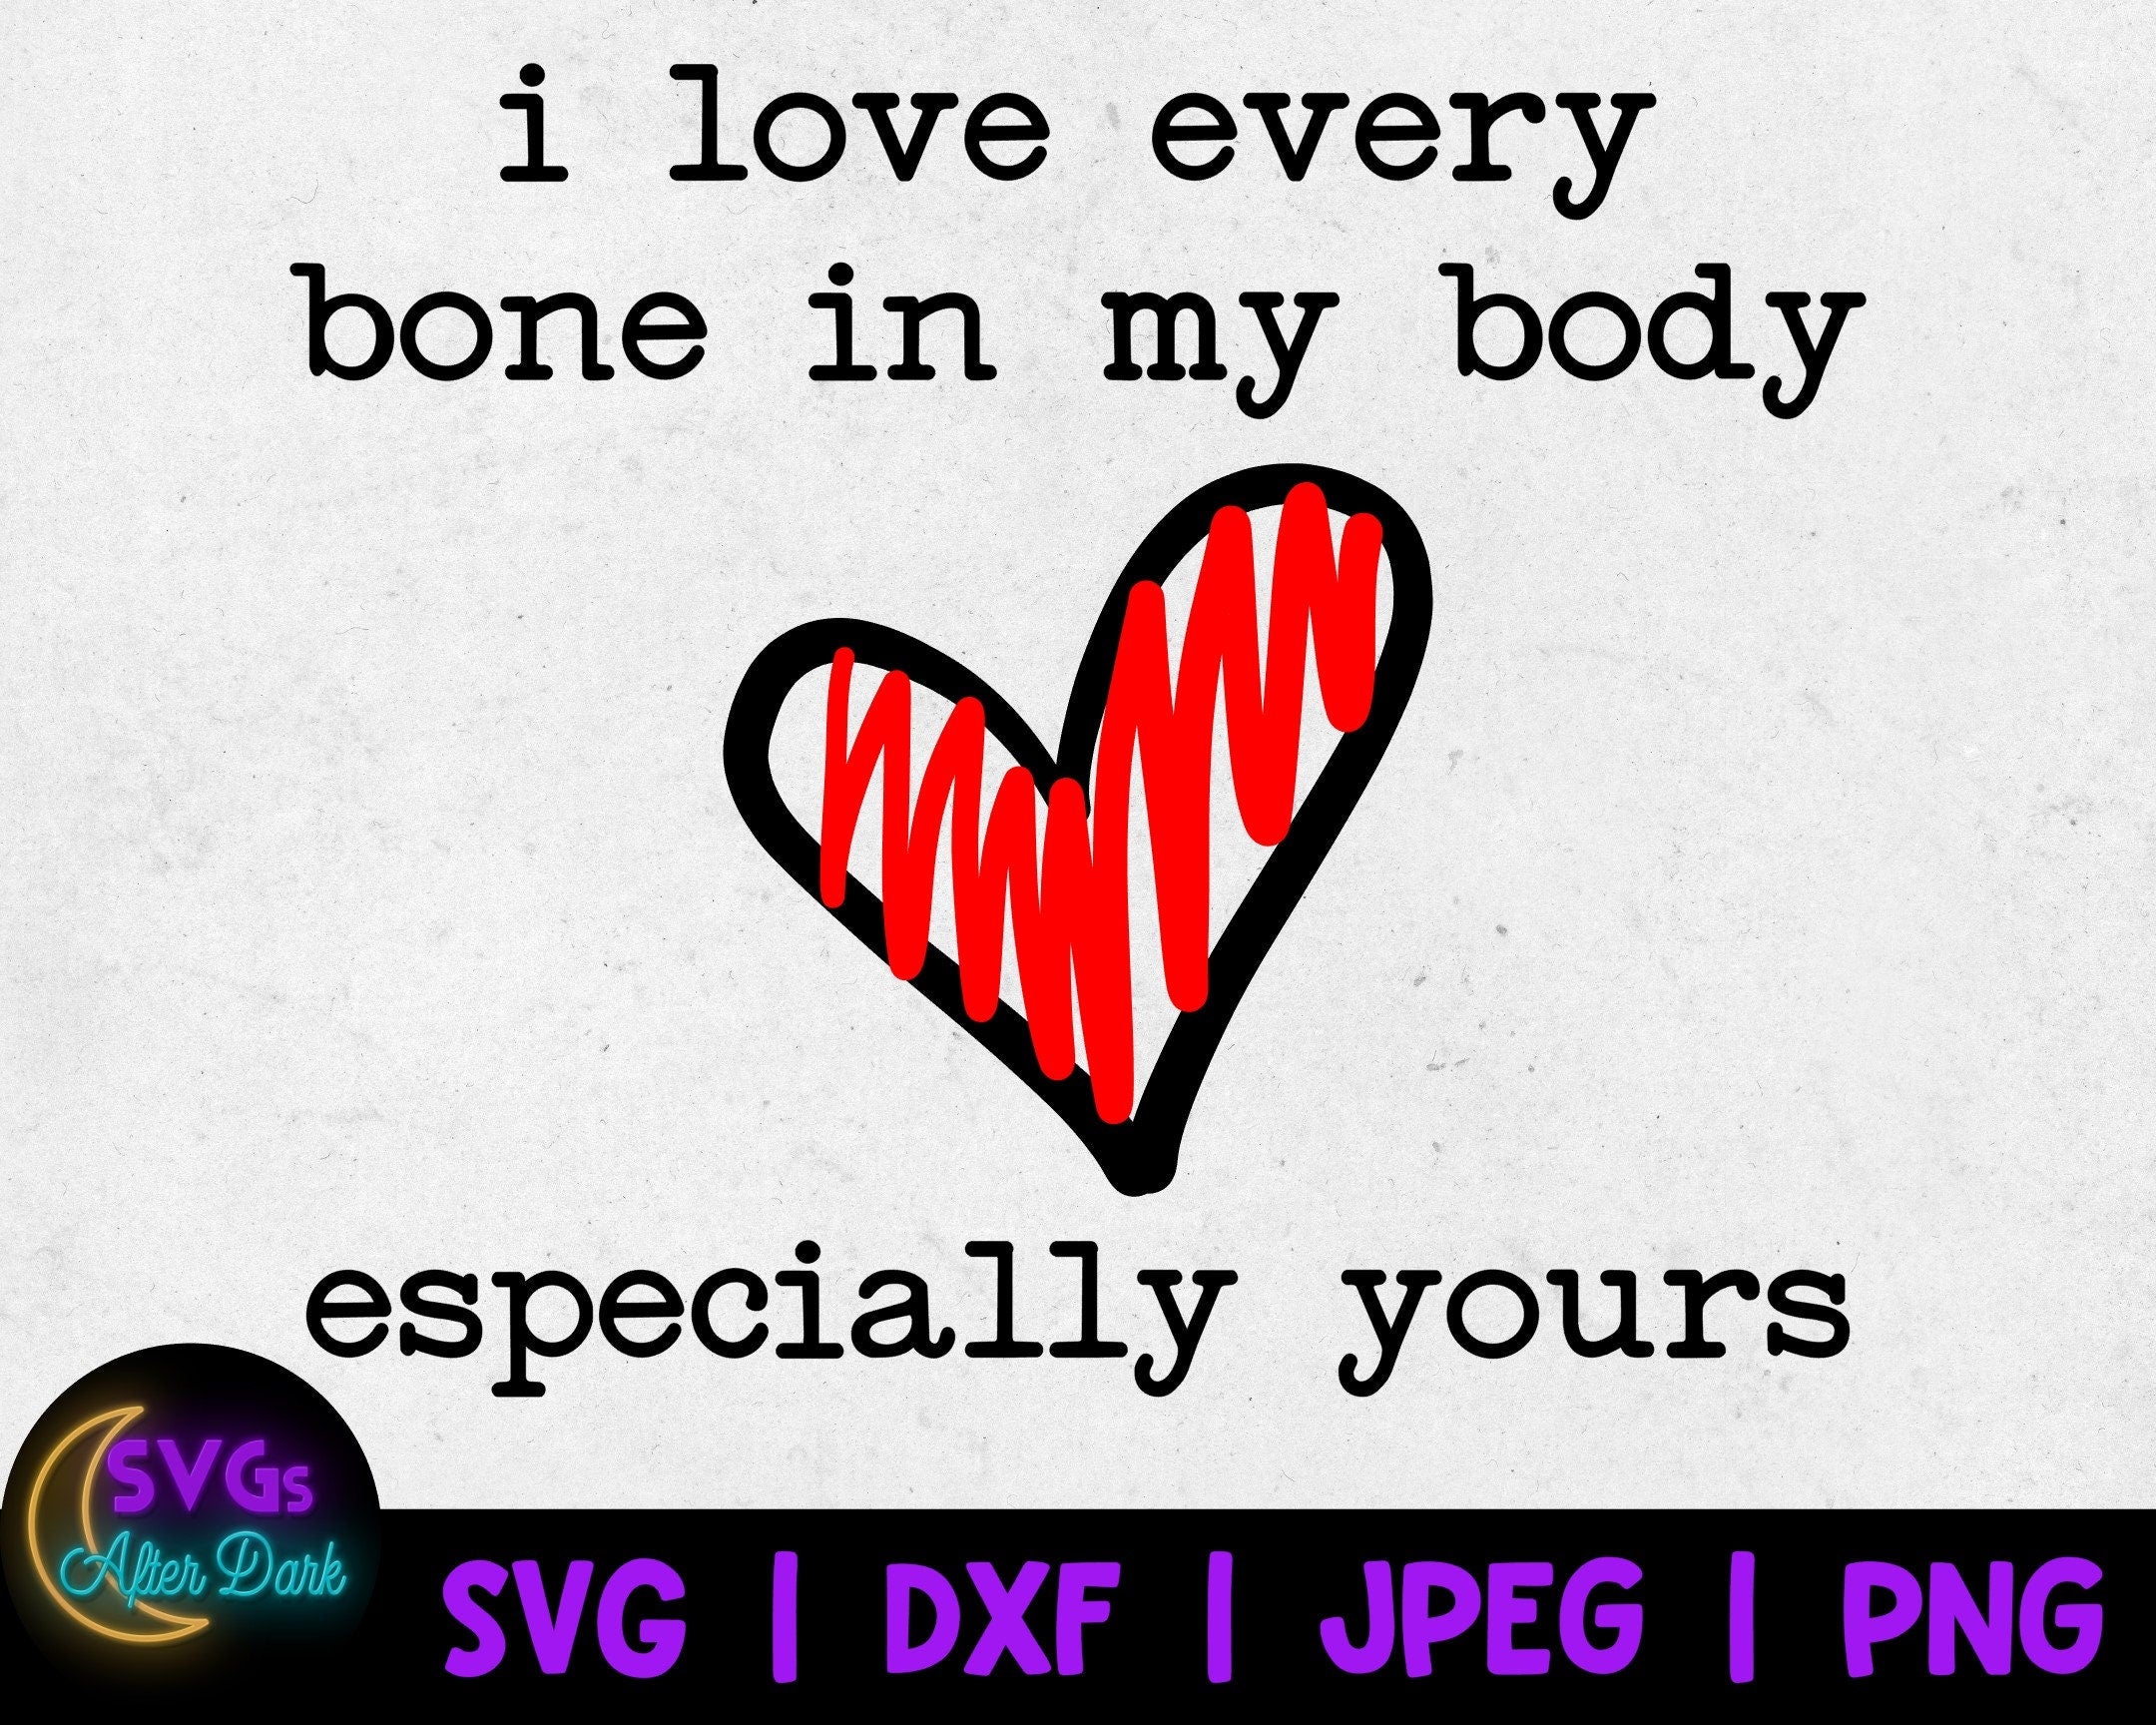 NSFW SVG - Love Every Bone in my Body Especially Yours SVG - Dirty